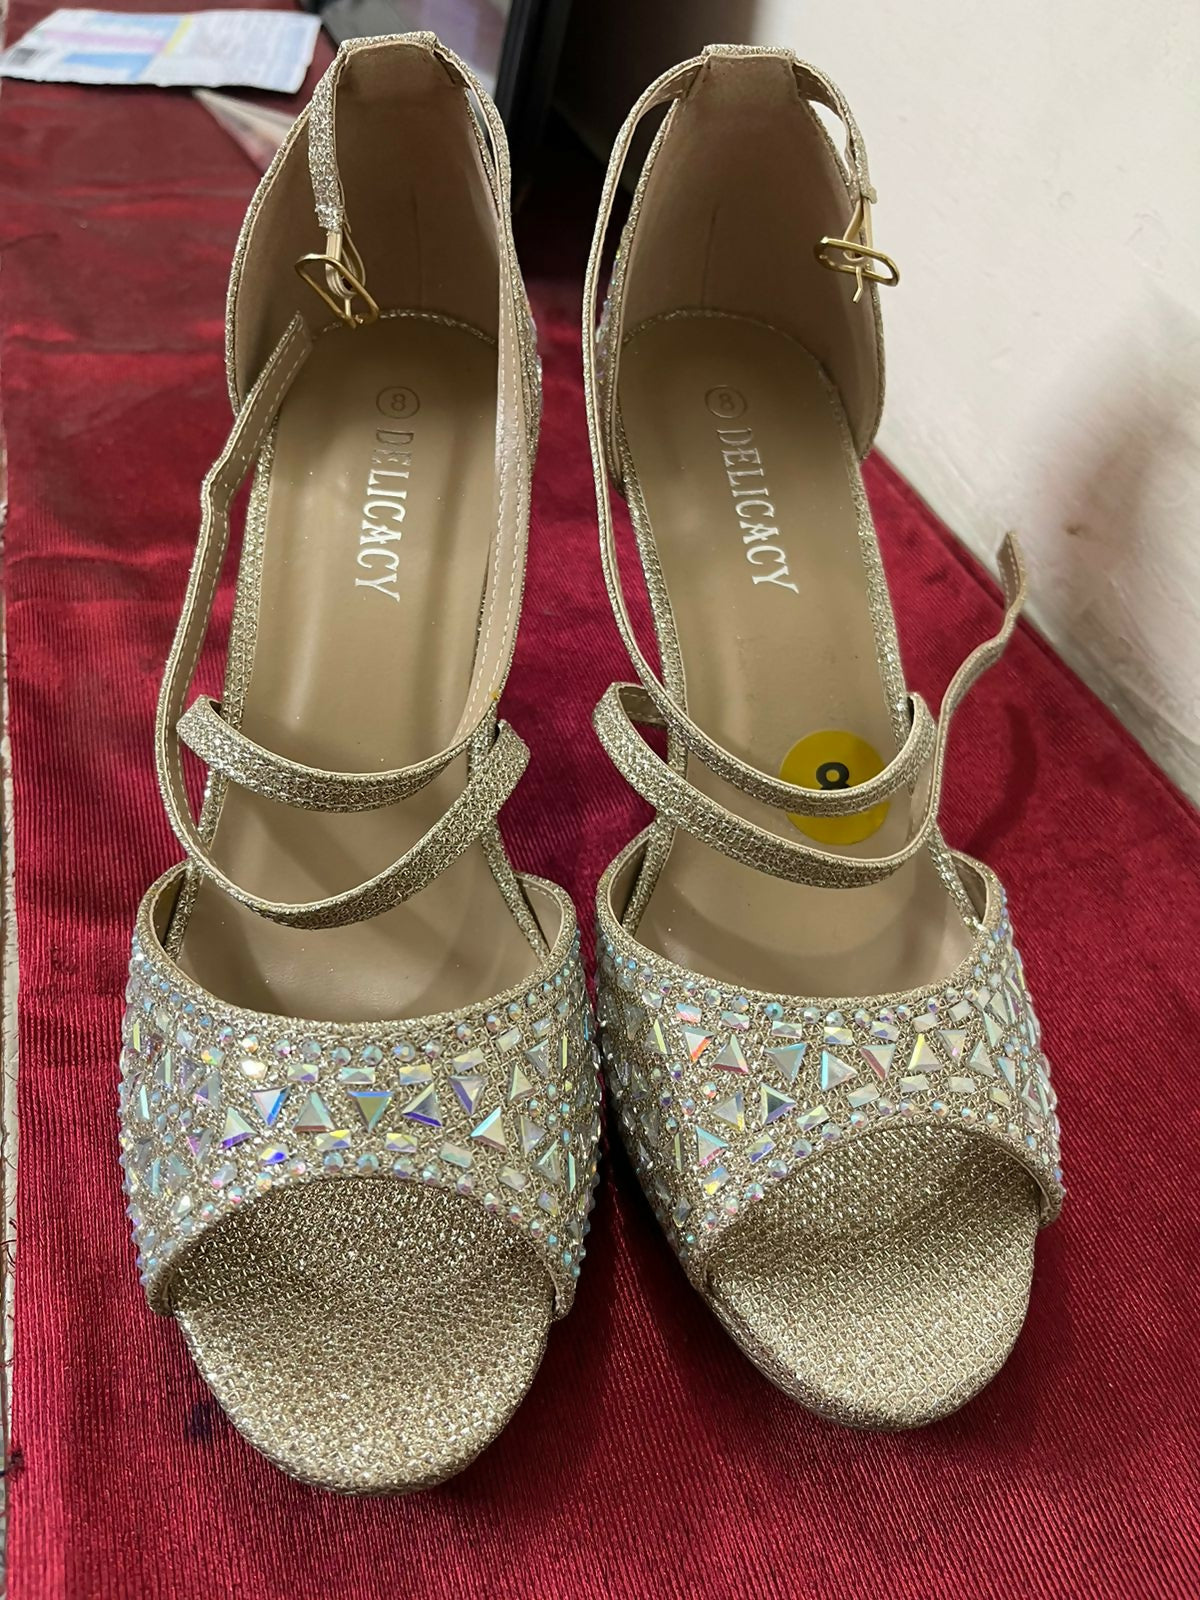 Delicacy(USA) | Fancy Gold Heels | Women Shoes | Size: 8 | New